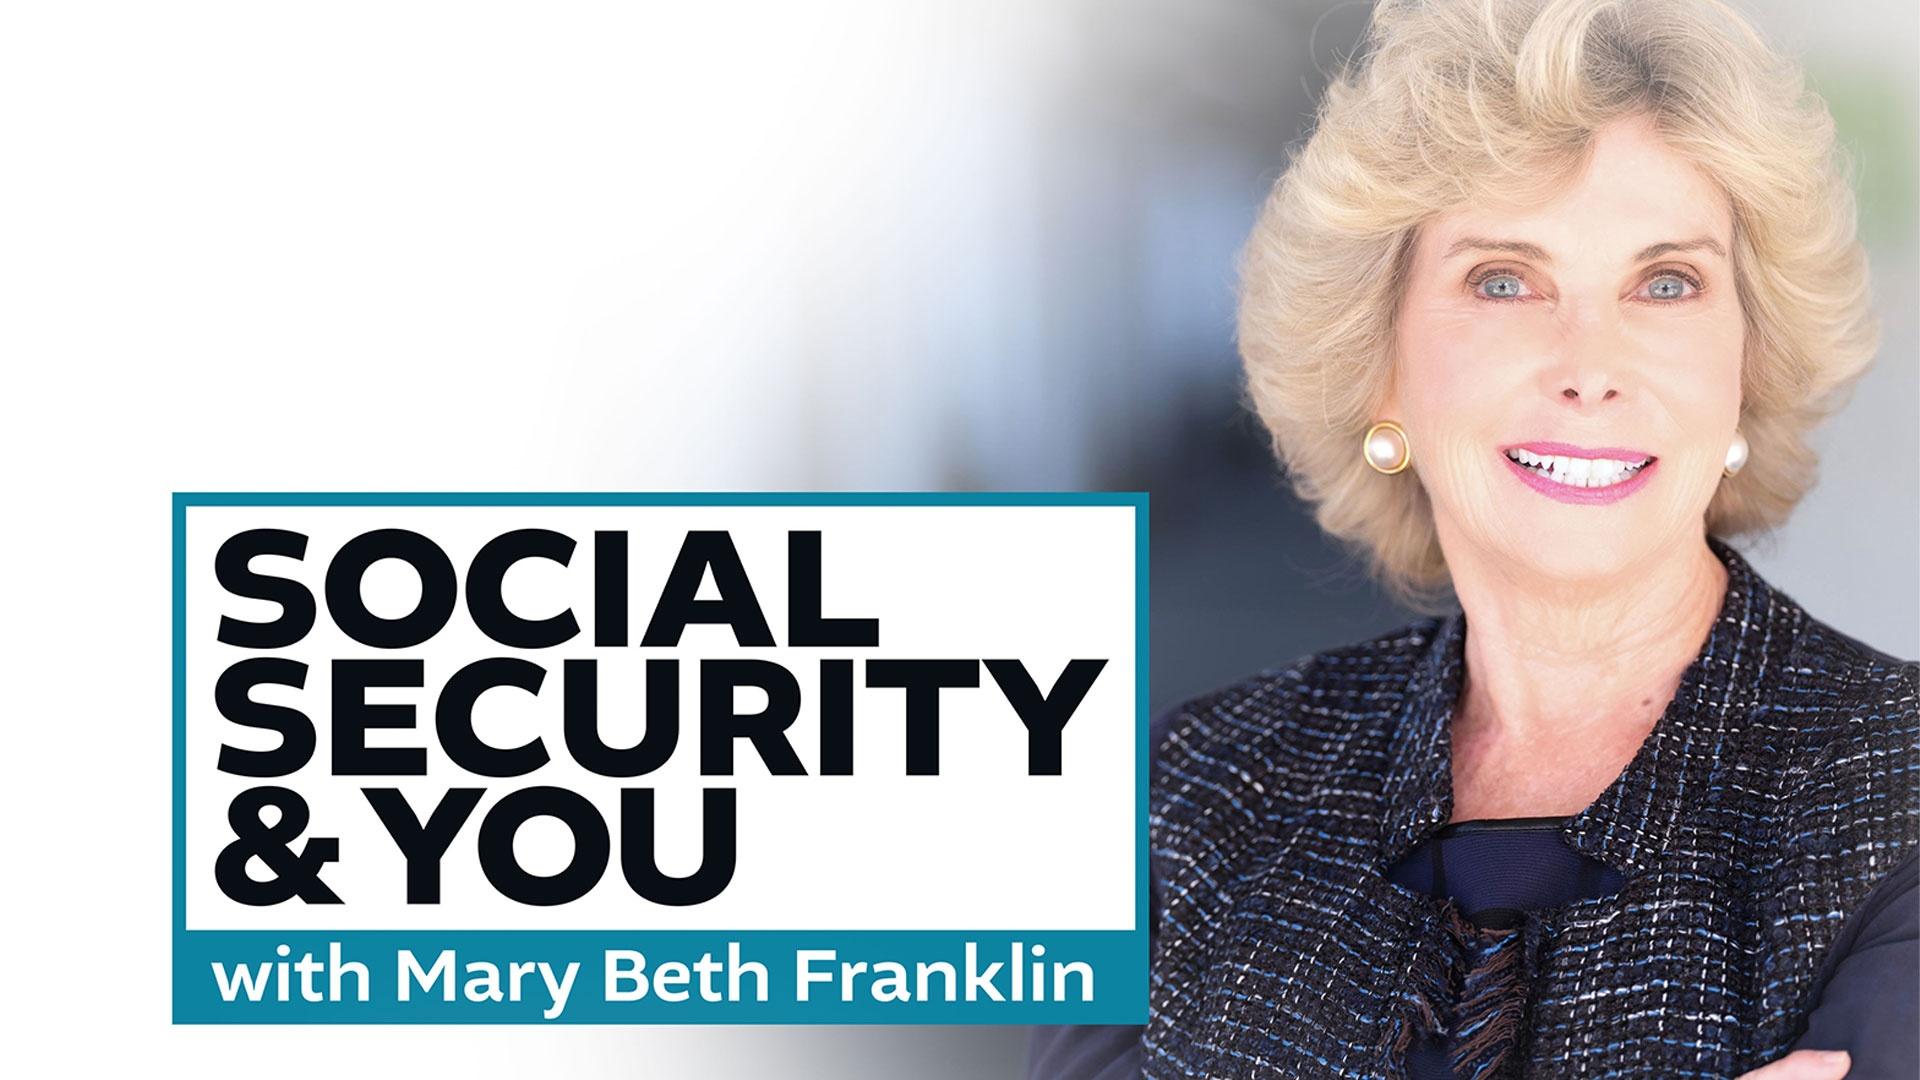 Social Security & You with Mary Beth Franklin